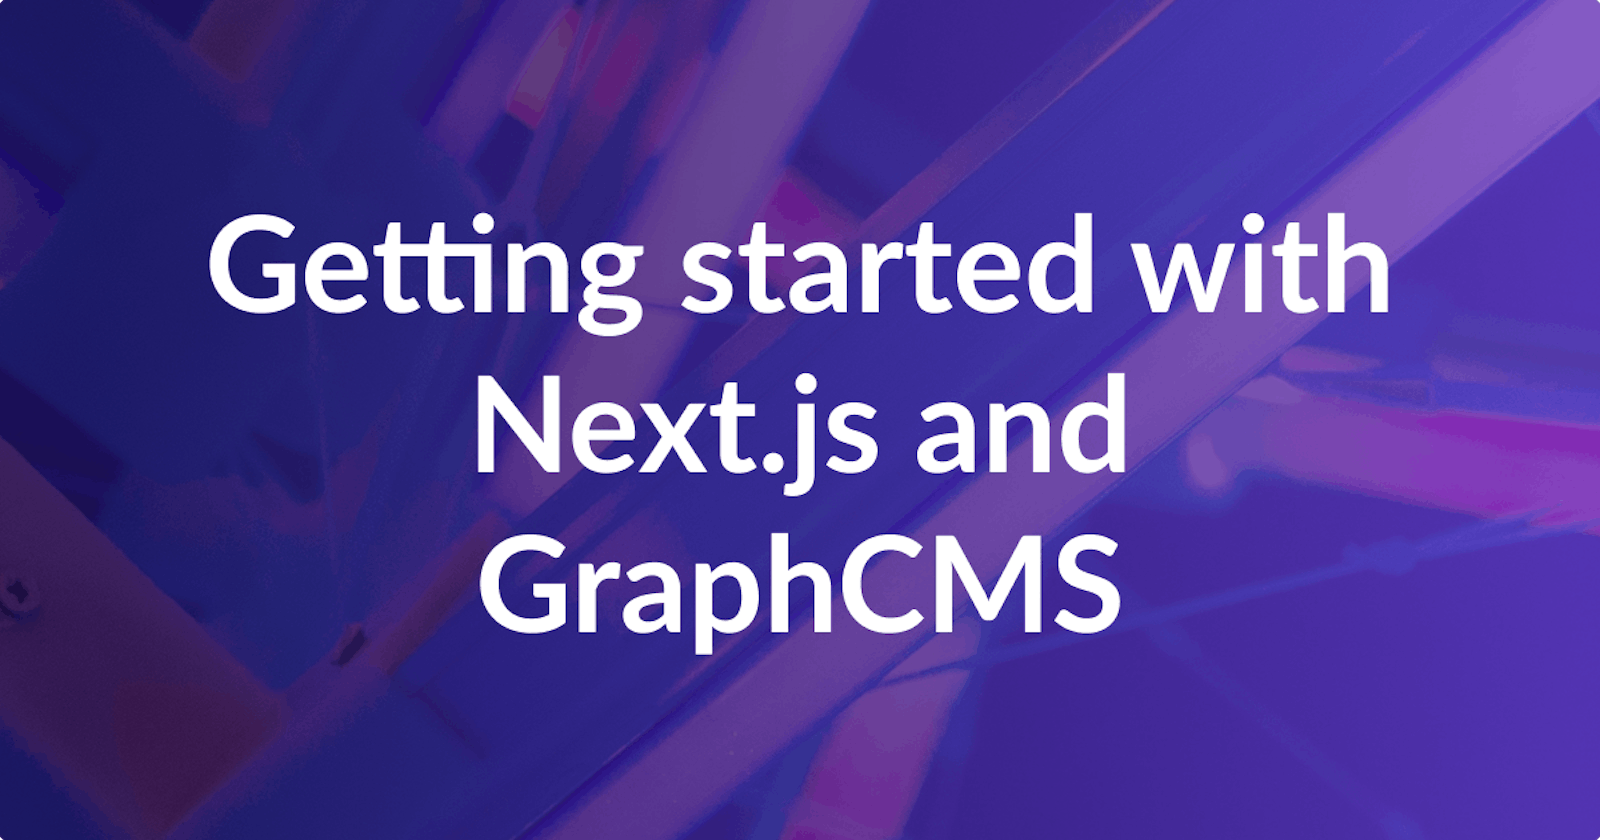 Getting started with Next.js and GraphCMS